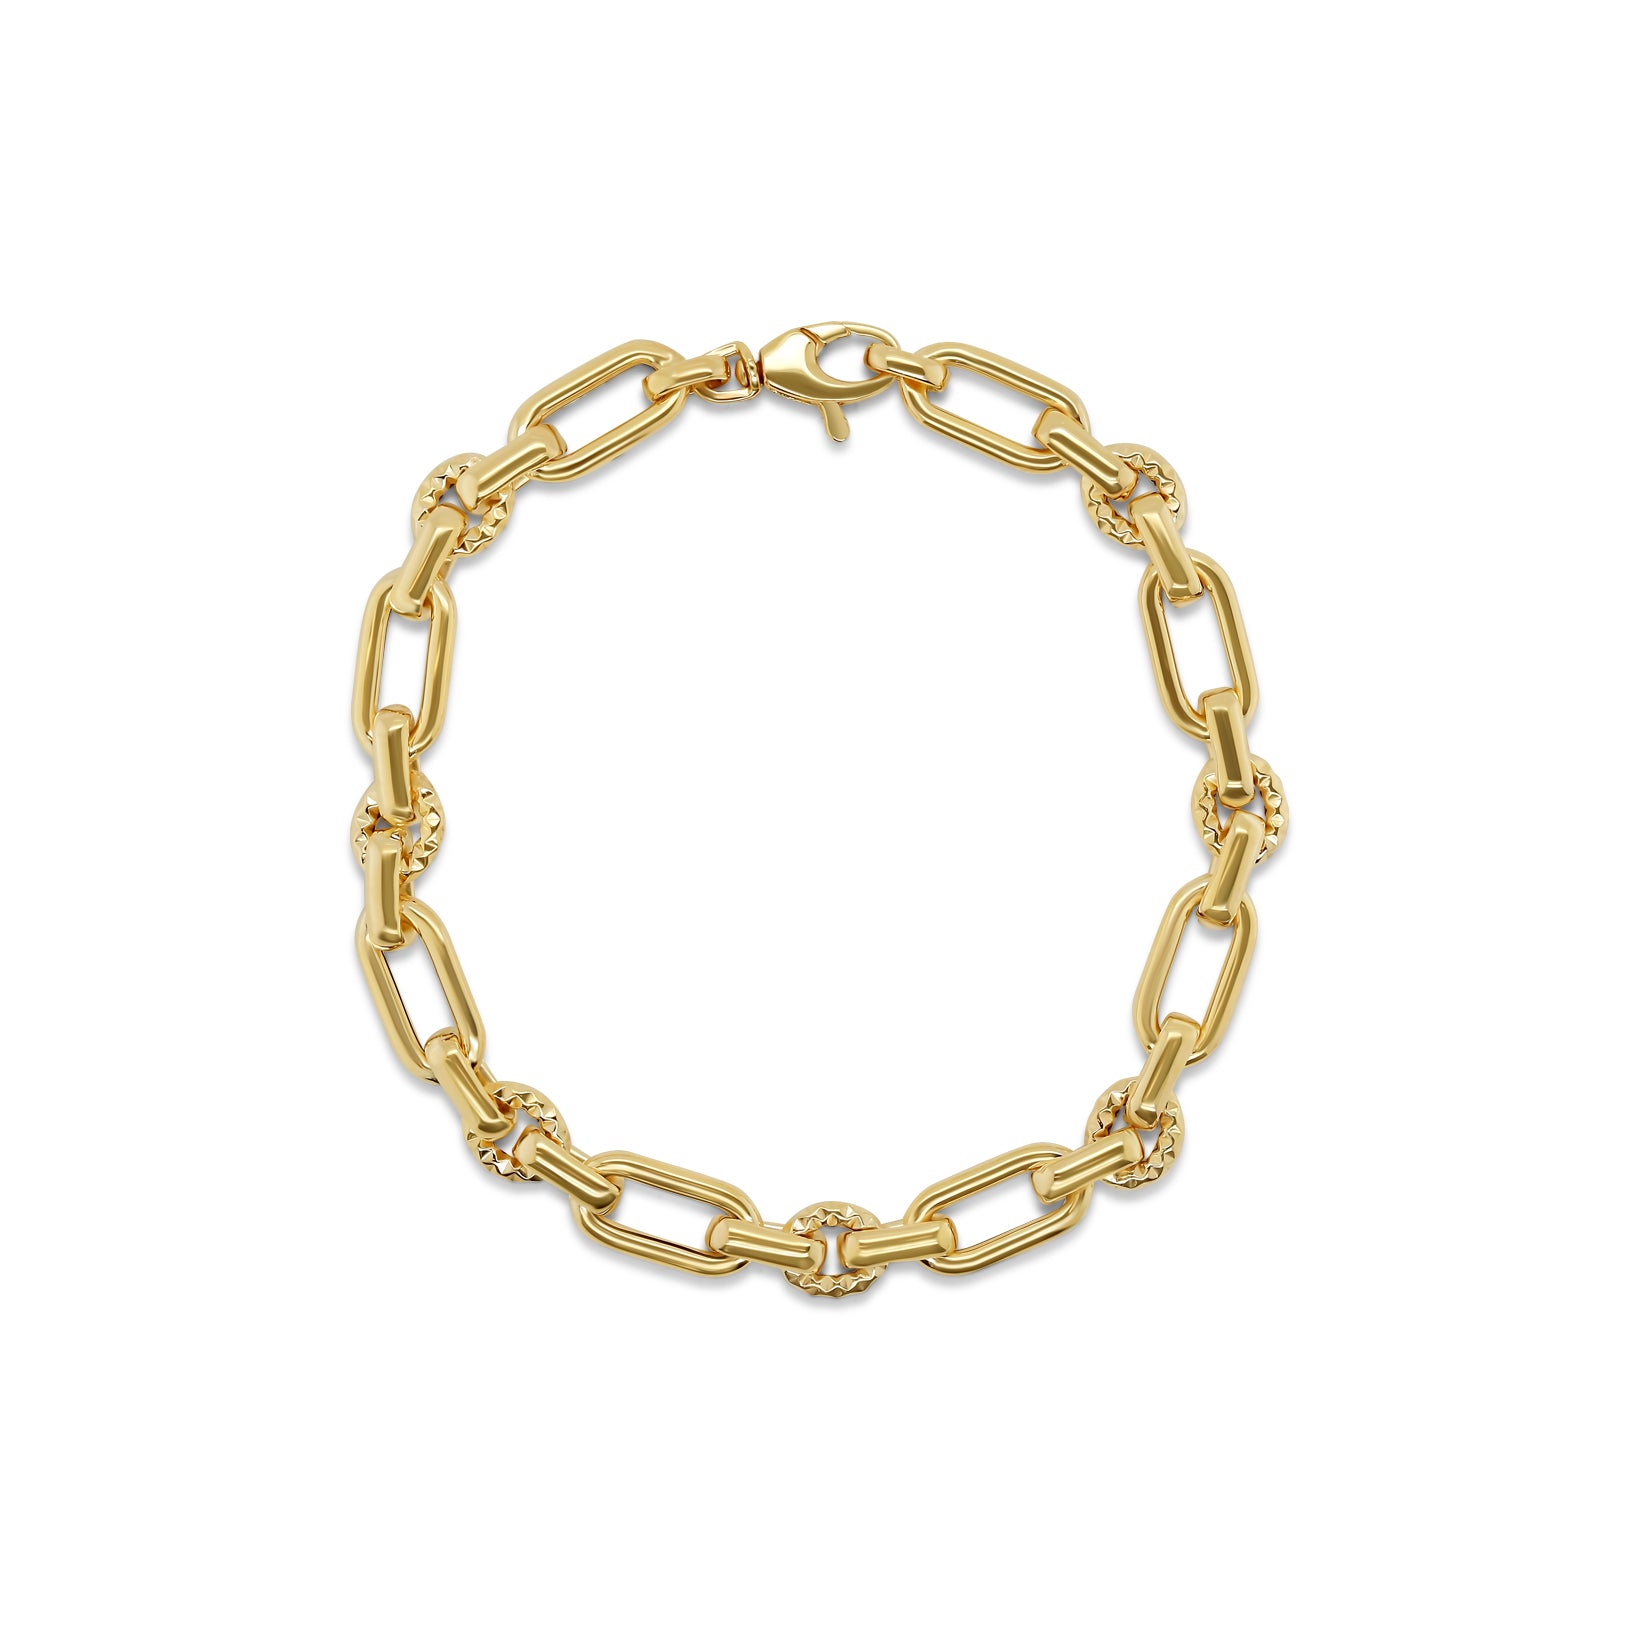 7.5 inch 14k yellow gold chunky chain alternating textured link bracelet